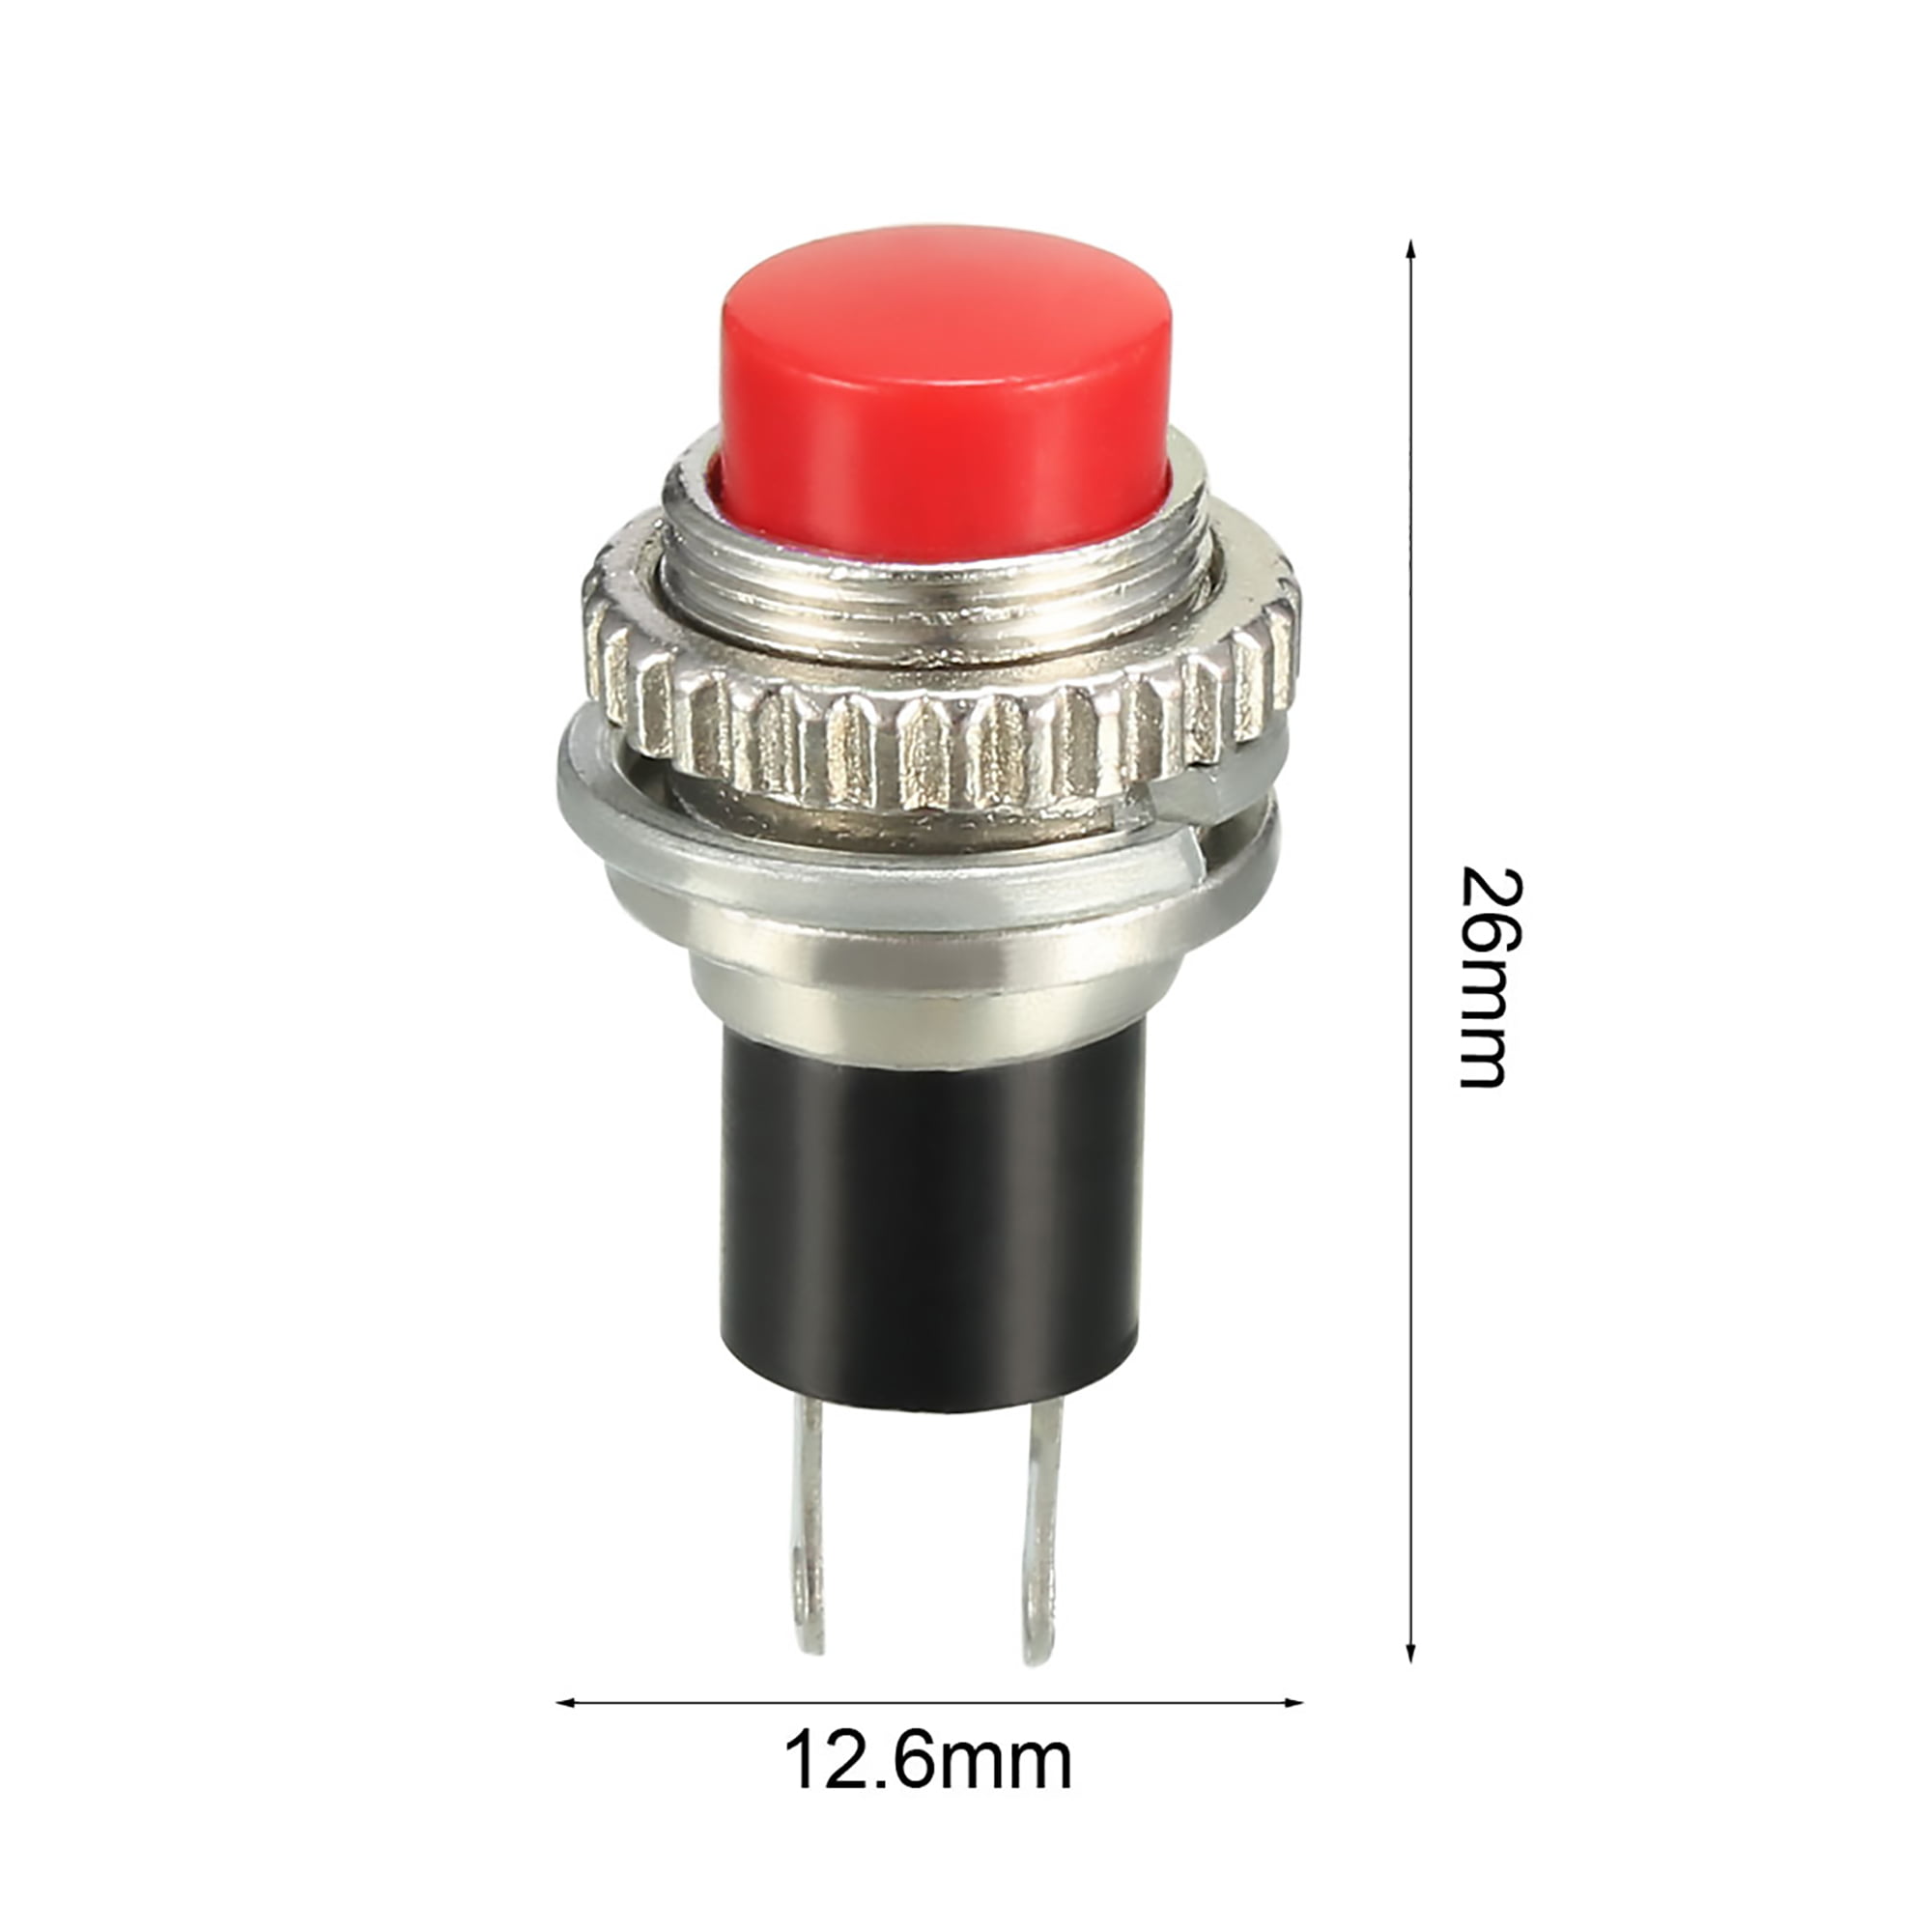 5 A pack of five Red Push Button Switch Momentary 